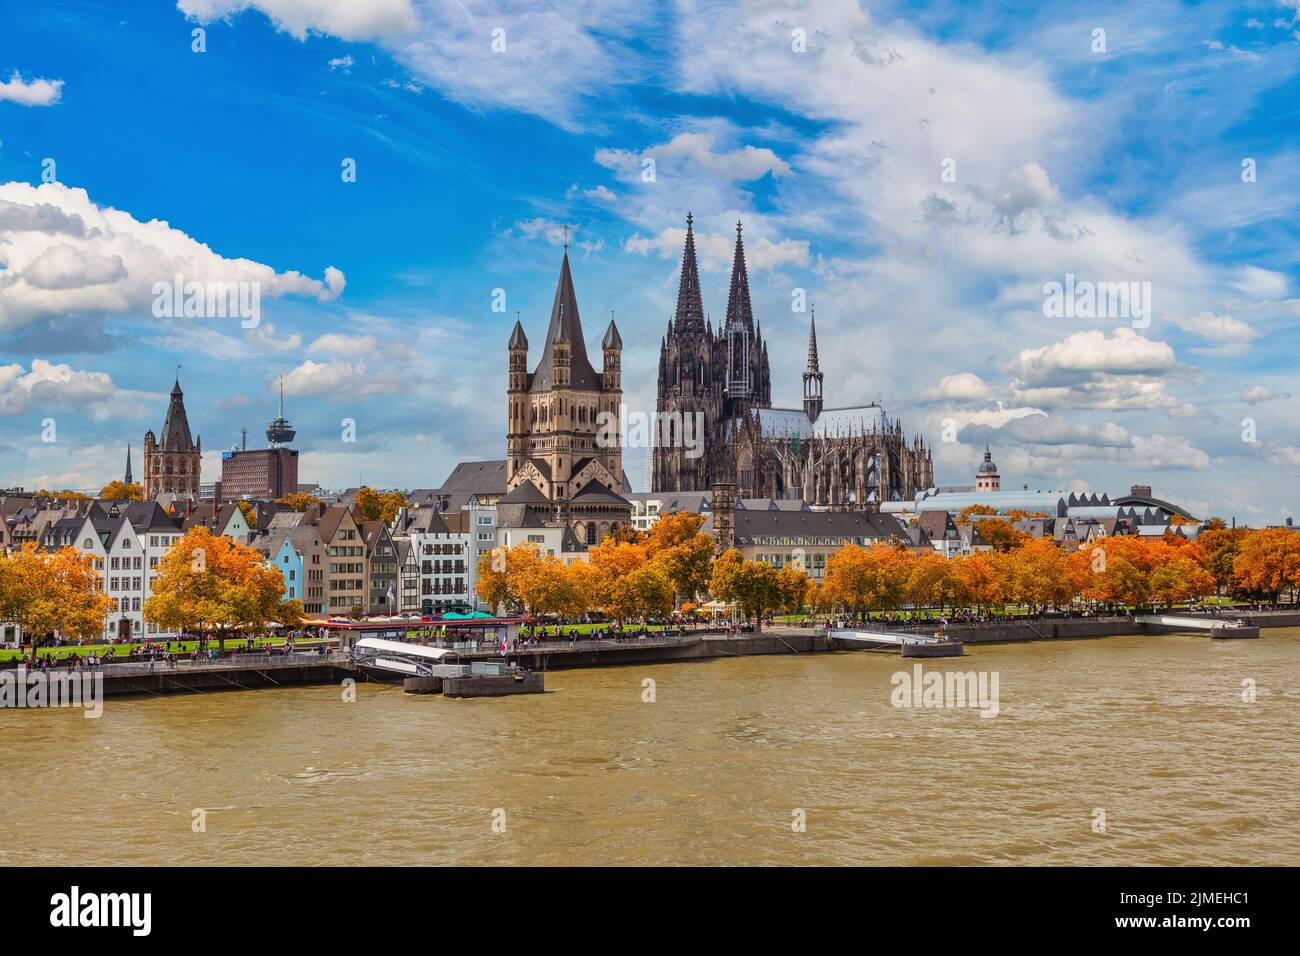 Cologne Germany, city skyline at Cologne Cathedral (Cologne Dom) and Rhine River with autumn foliage Stock Photo